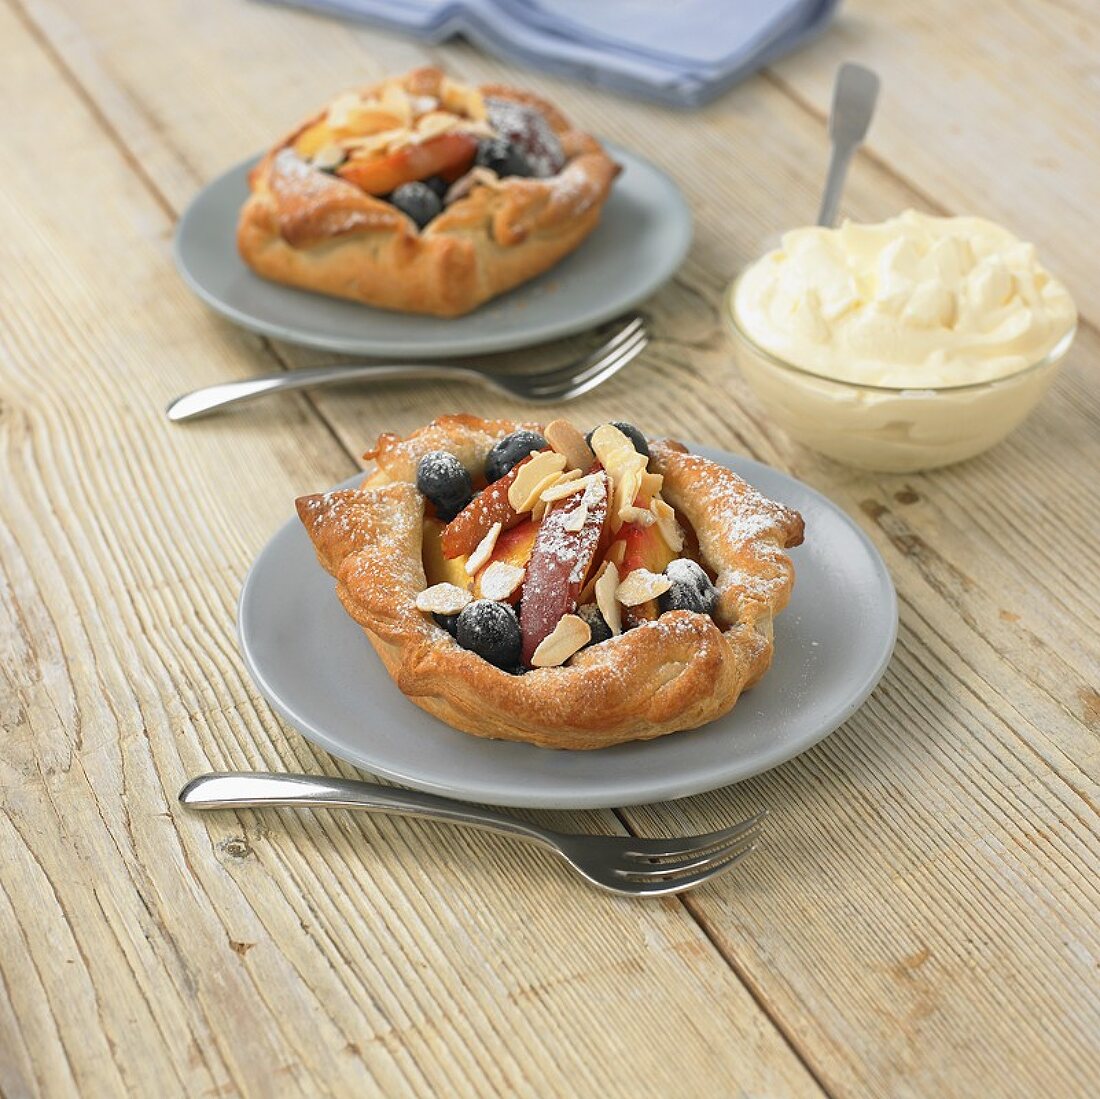 Peach wedges and blueberries in puff pastry shells